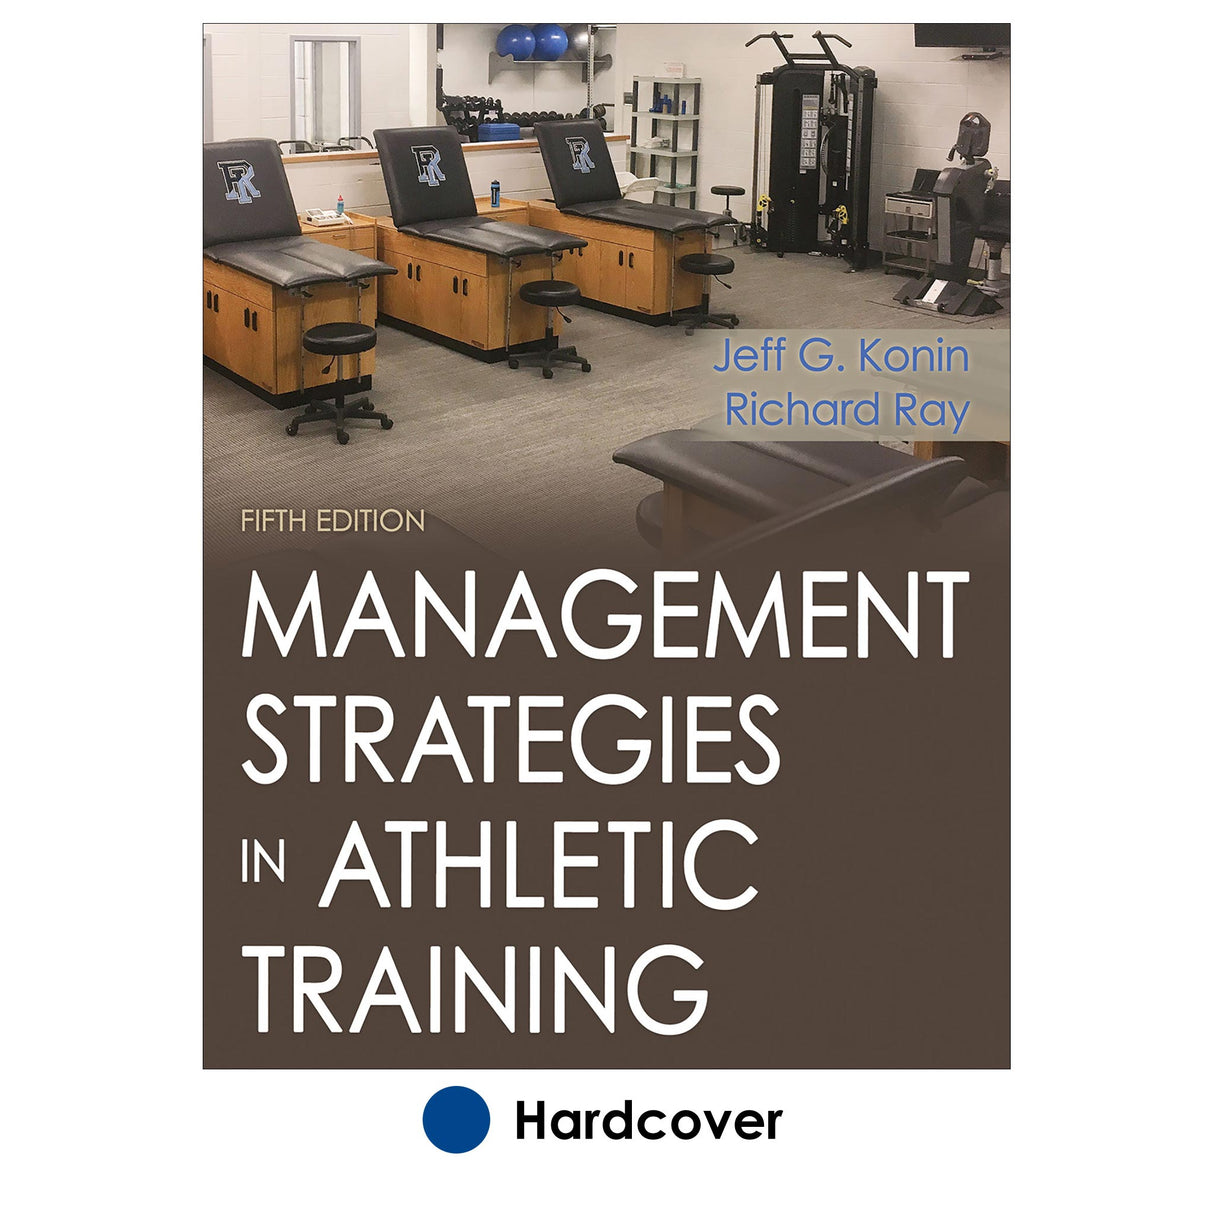 Management Strategies in Athletic Training 5th Edition